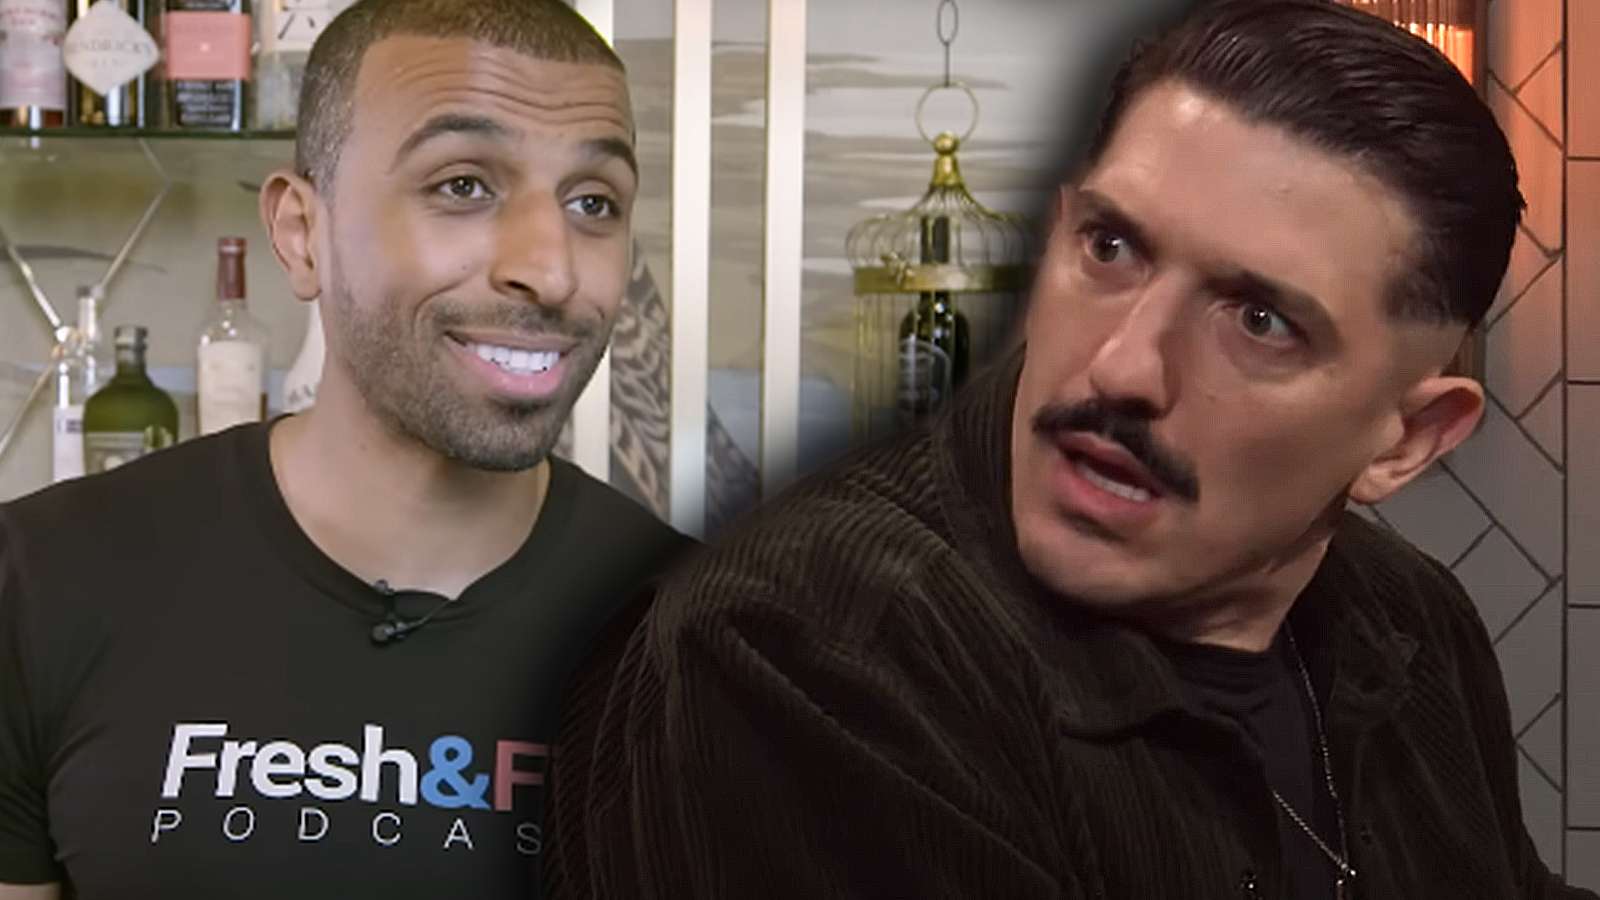 Fresh & Fit's Myron Gaines challenges Andrew Schulz to fight after  “talentless” remark - Dexerto